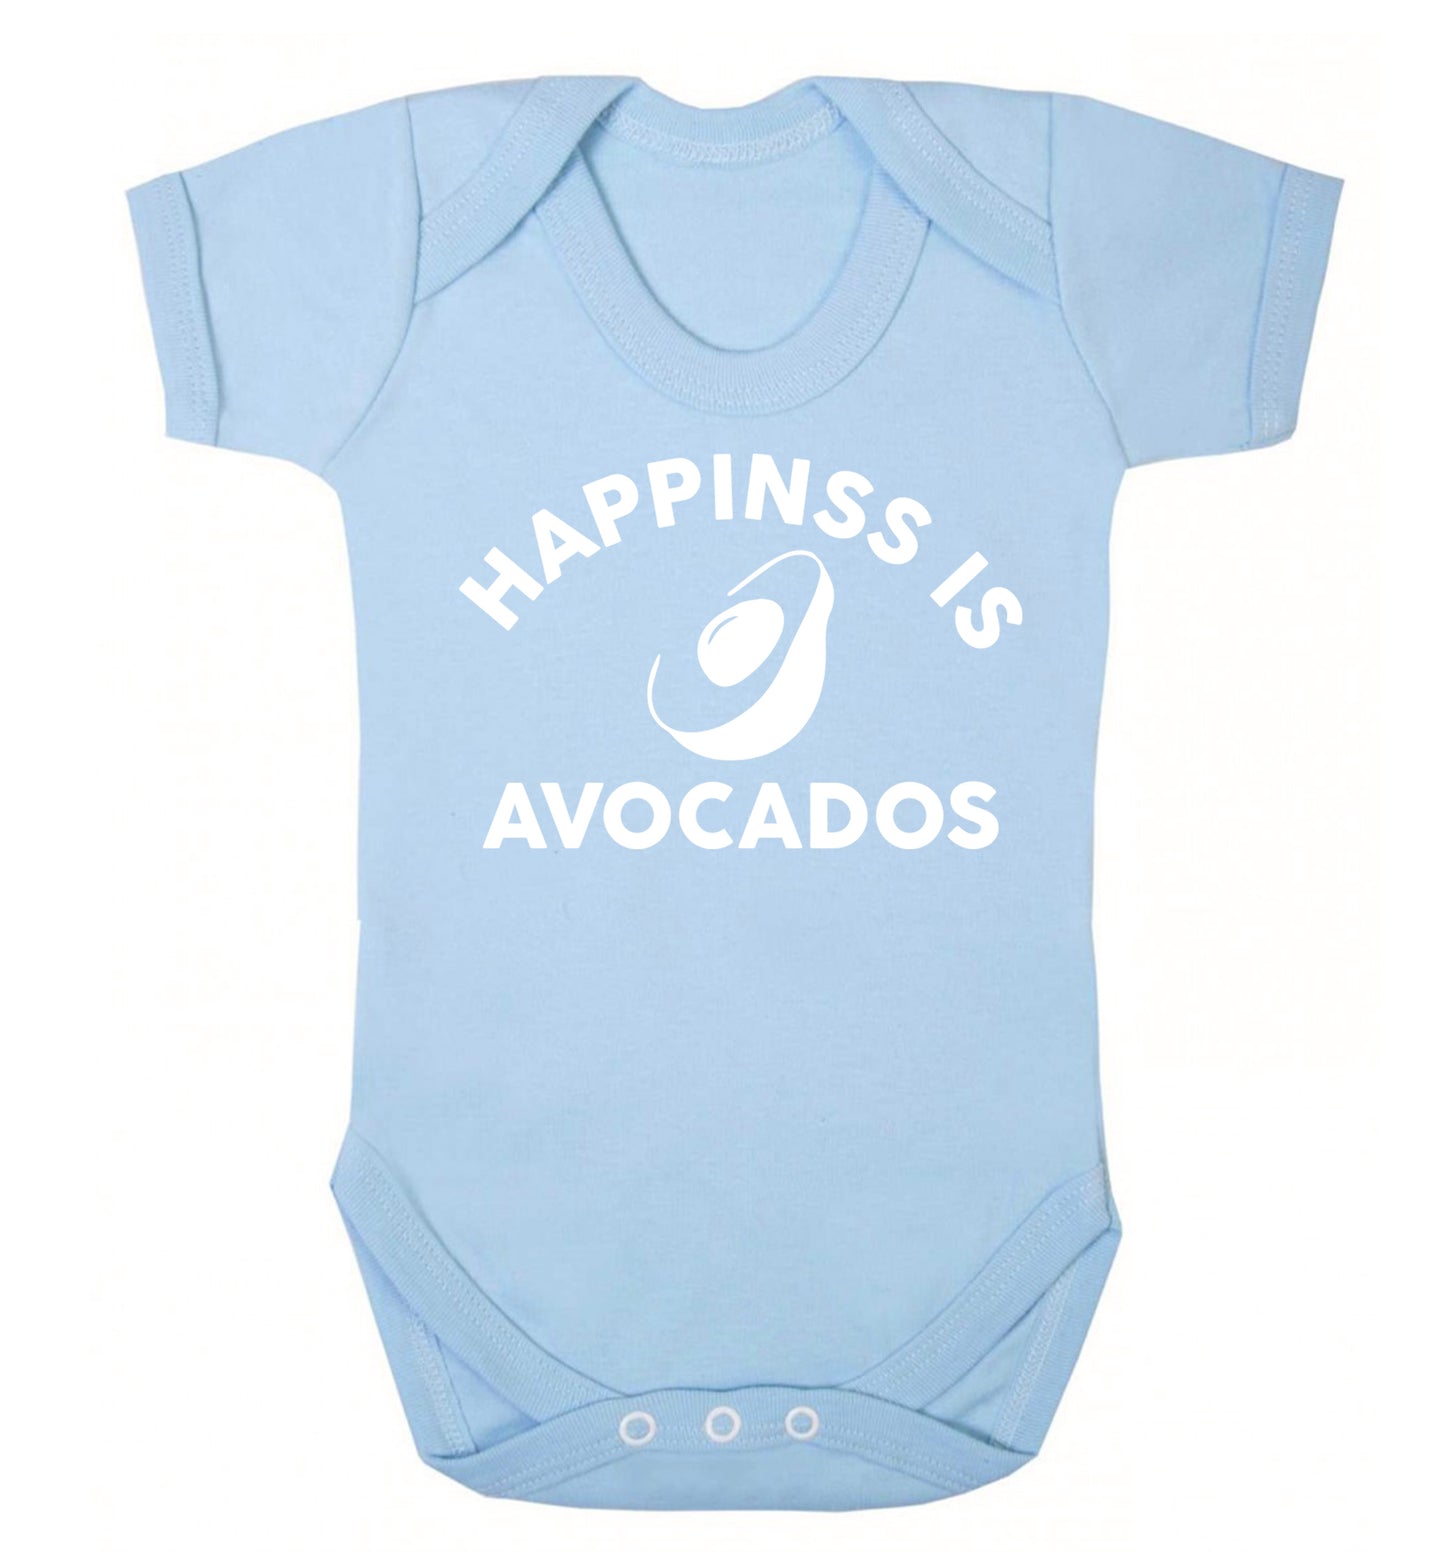 Happiness is avocados Baby Vest pale blue 18-24 months